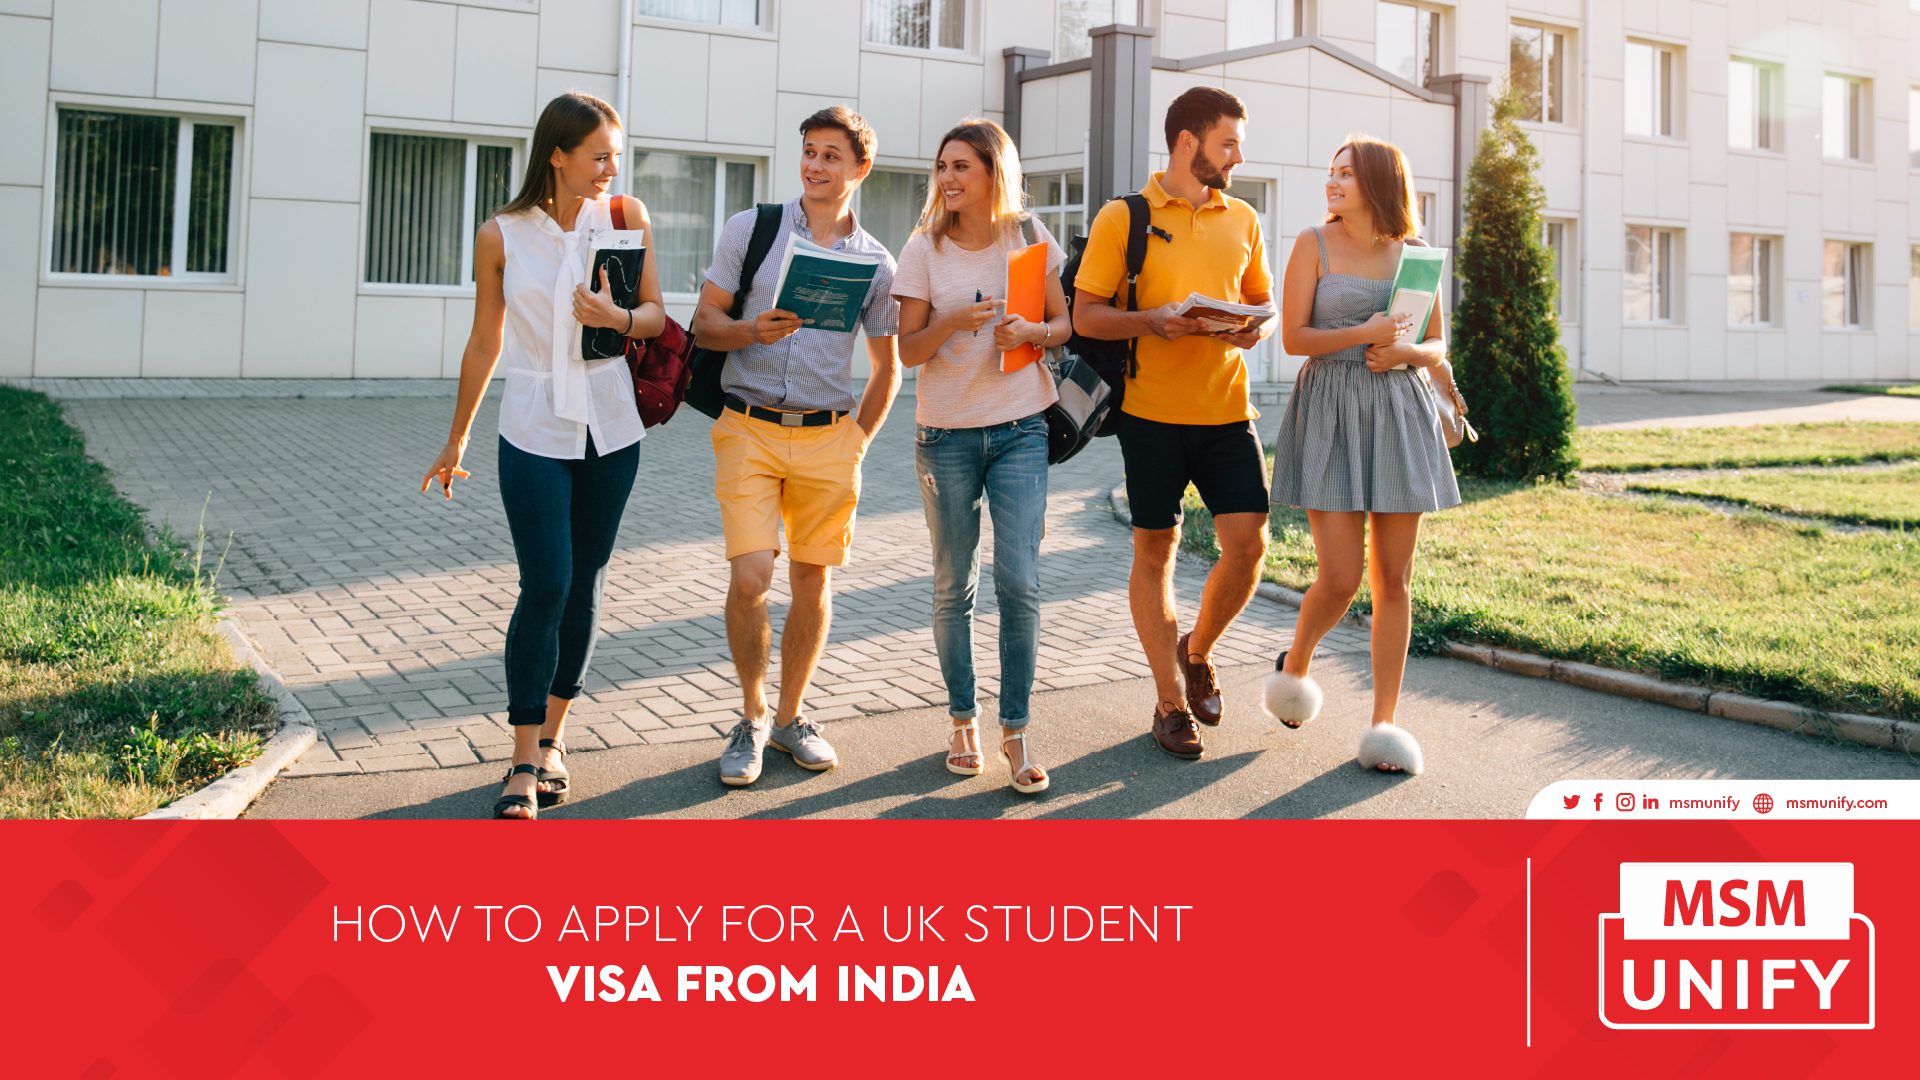 121322 MSM Unify How to Apply for a UK Student Visa from India 01